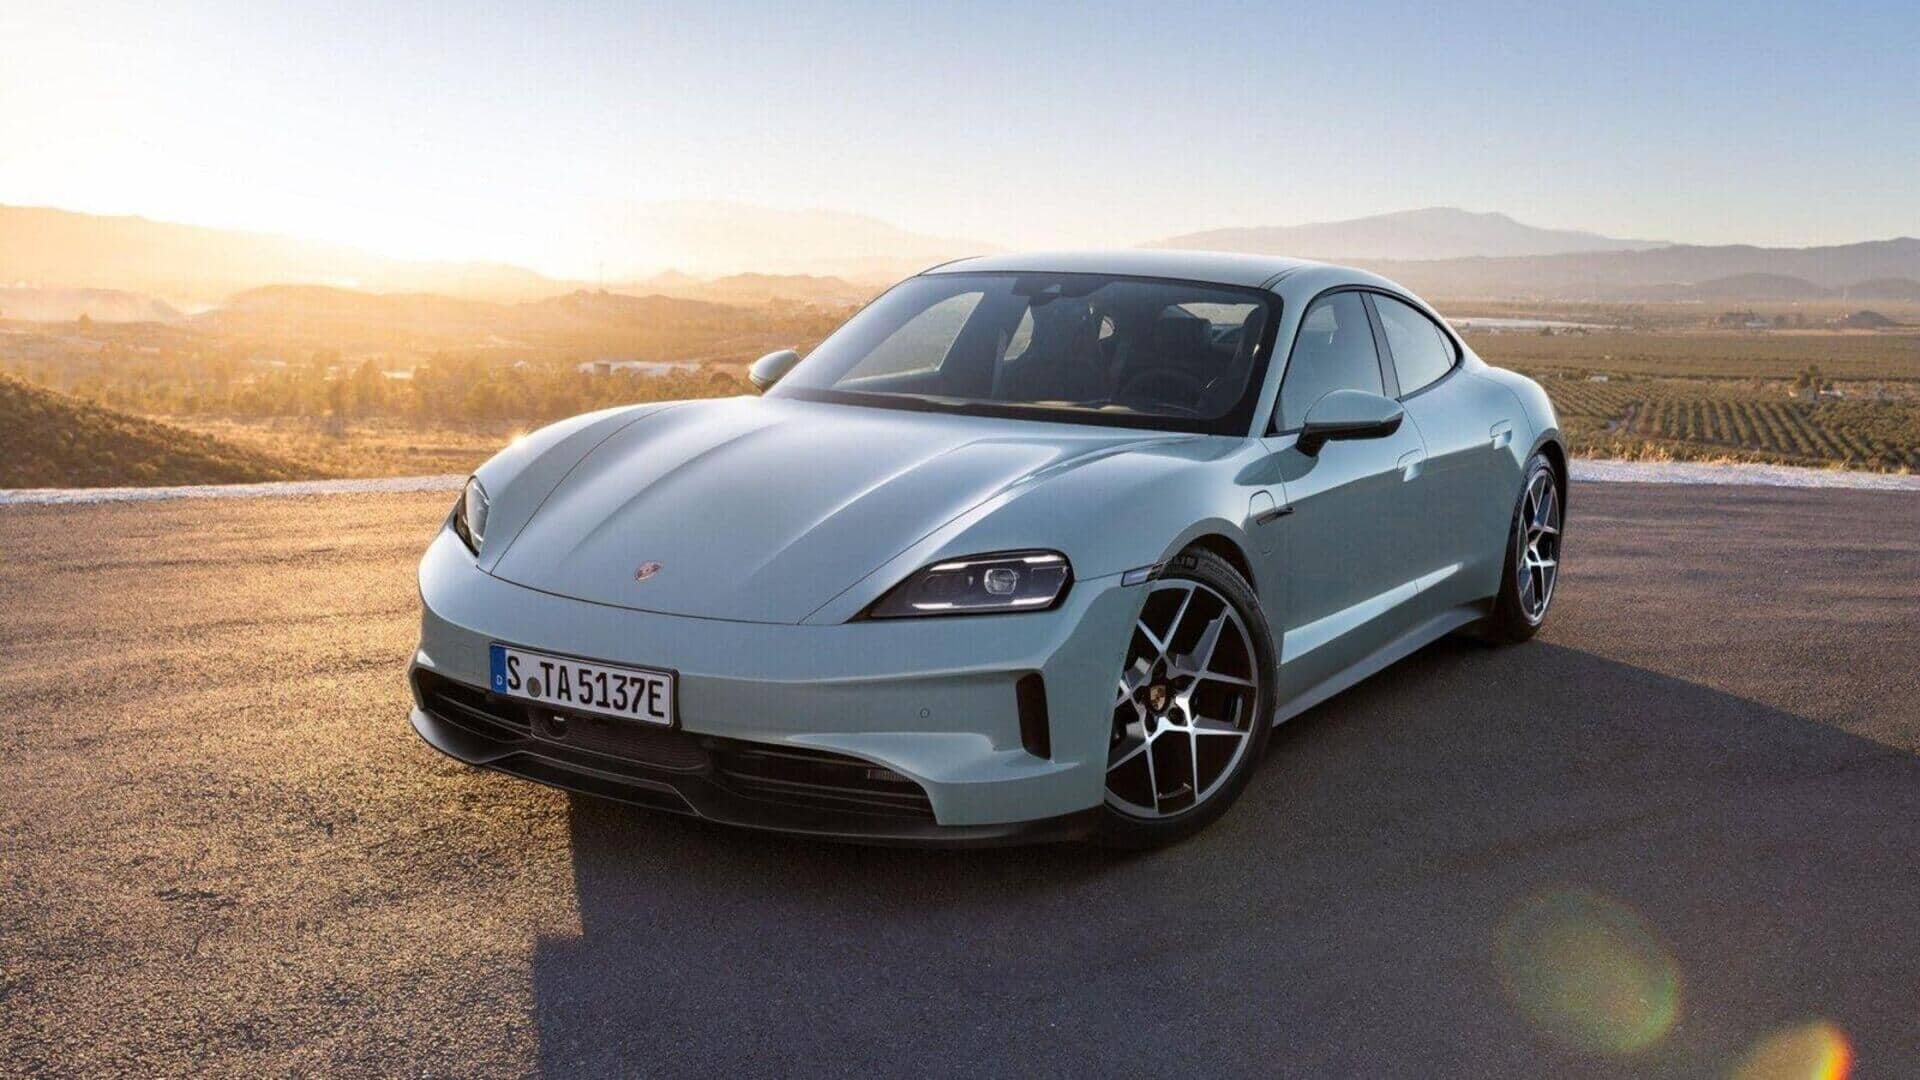 Porsche Taycan EV (facelift) launched in India at ₹1.89 crore